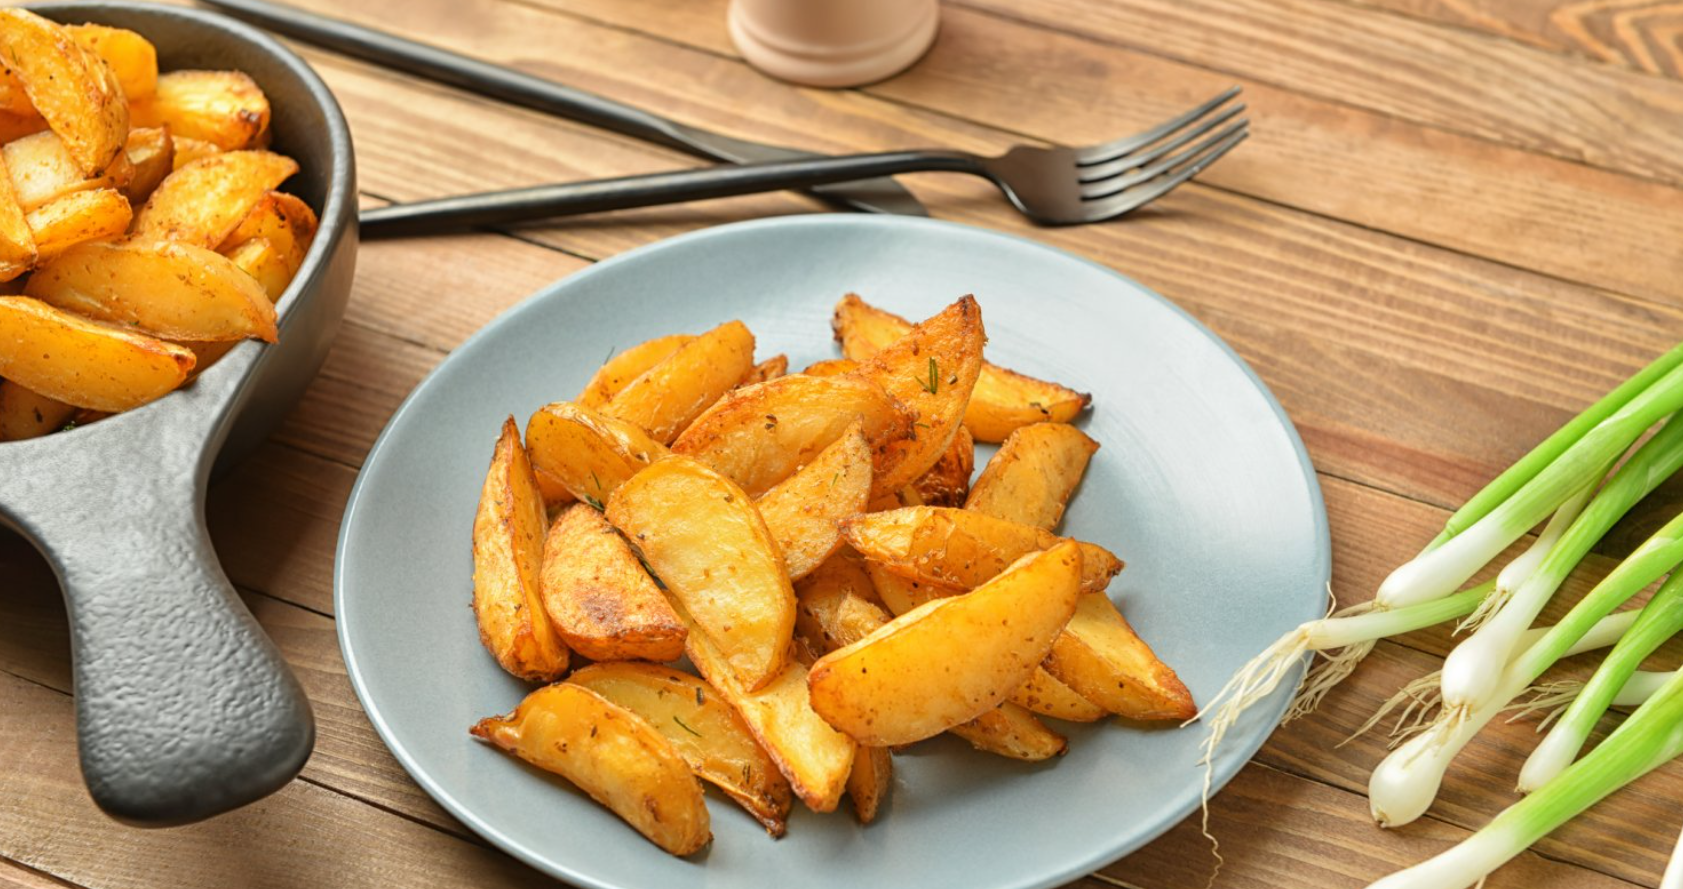 Why fried potatoes burn and fall apart: top 3 most common mistakes